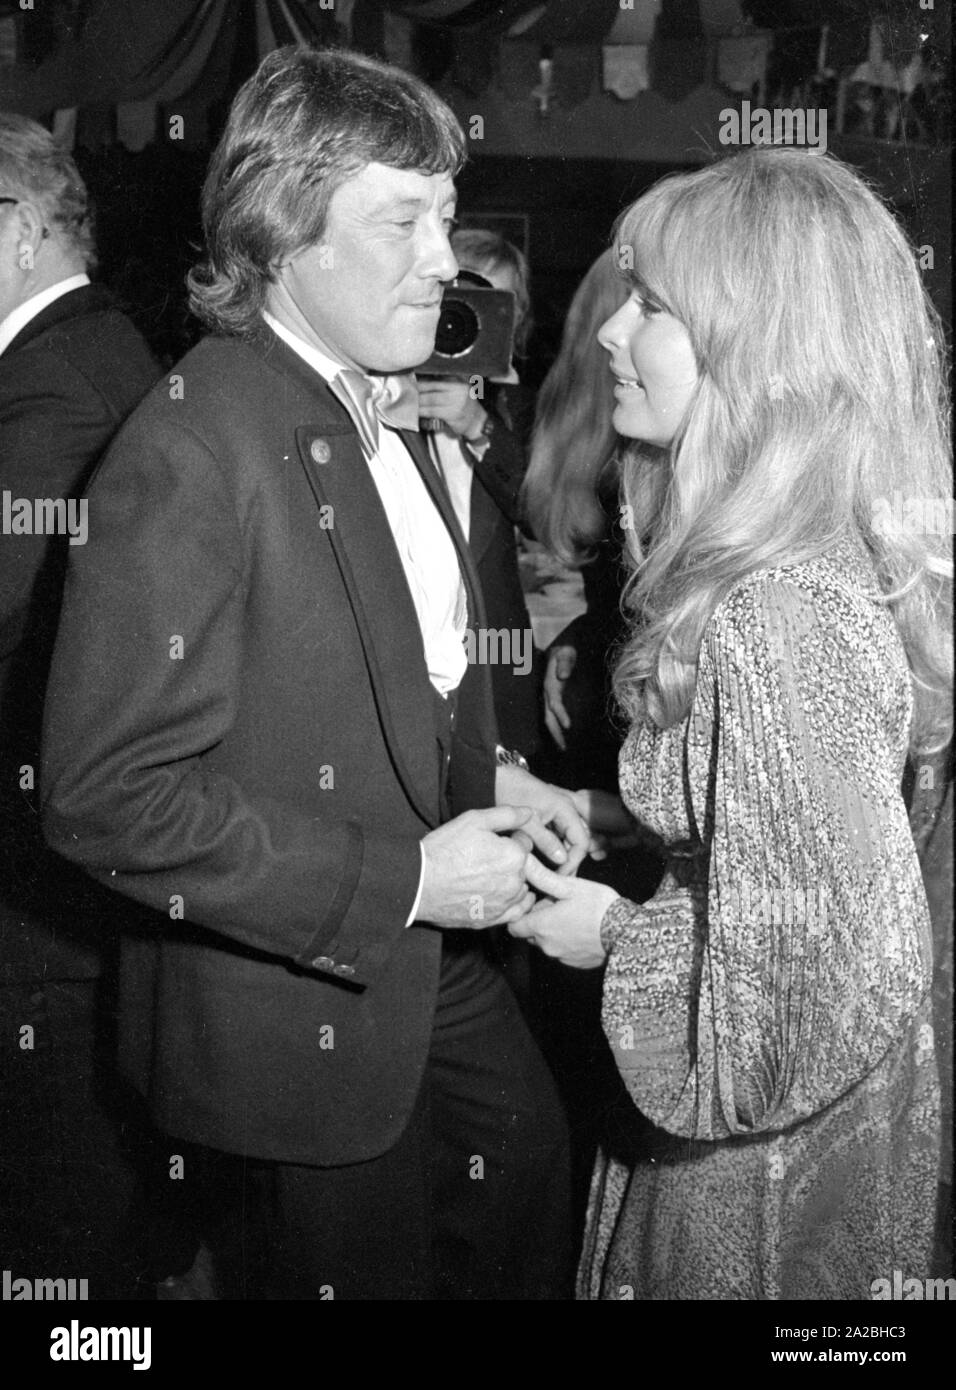 The actor and presenter couple Vivi Bach and Dietmar Schoenherr at the German Film Ball 1974 in Munich Stock Photo